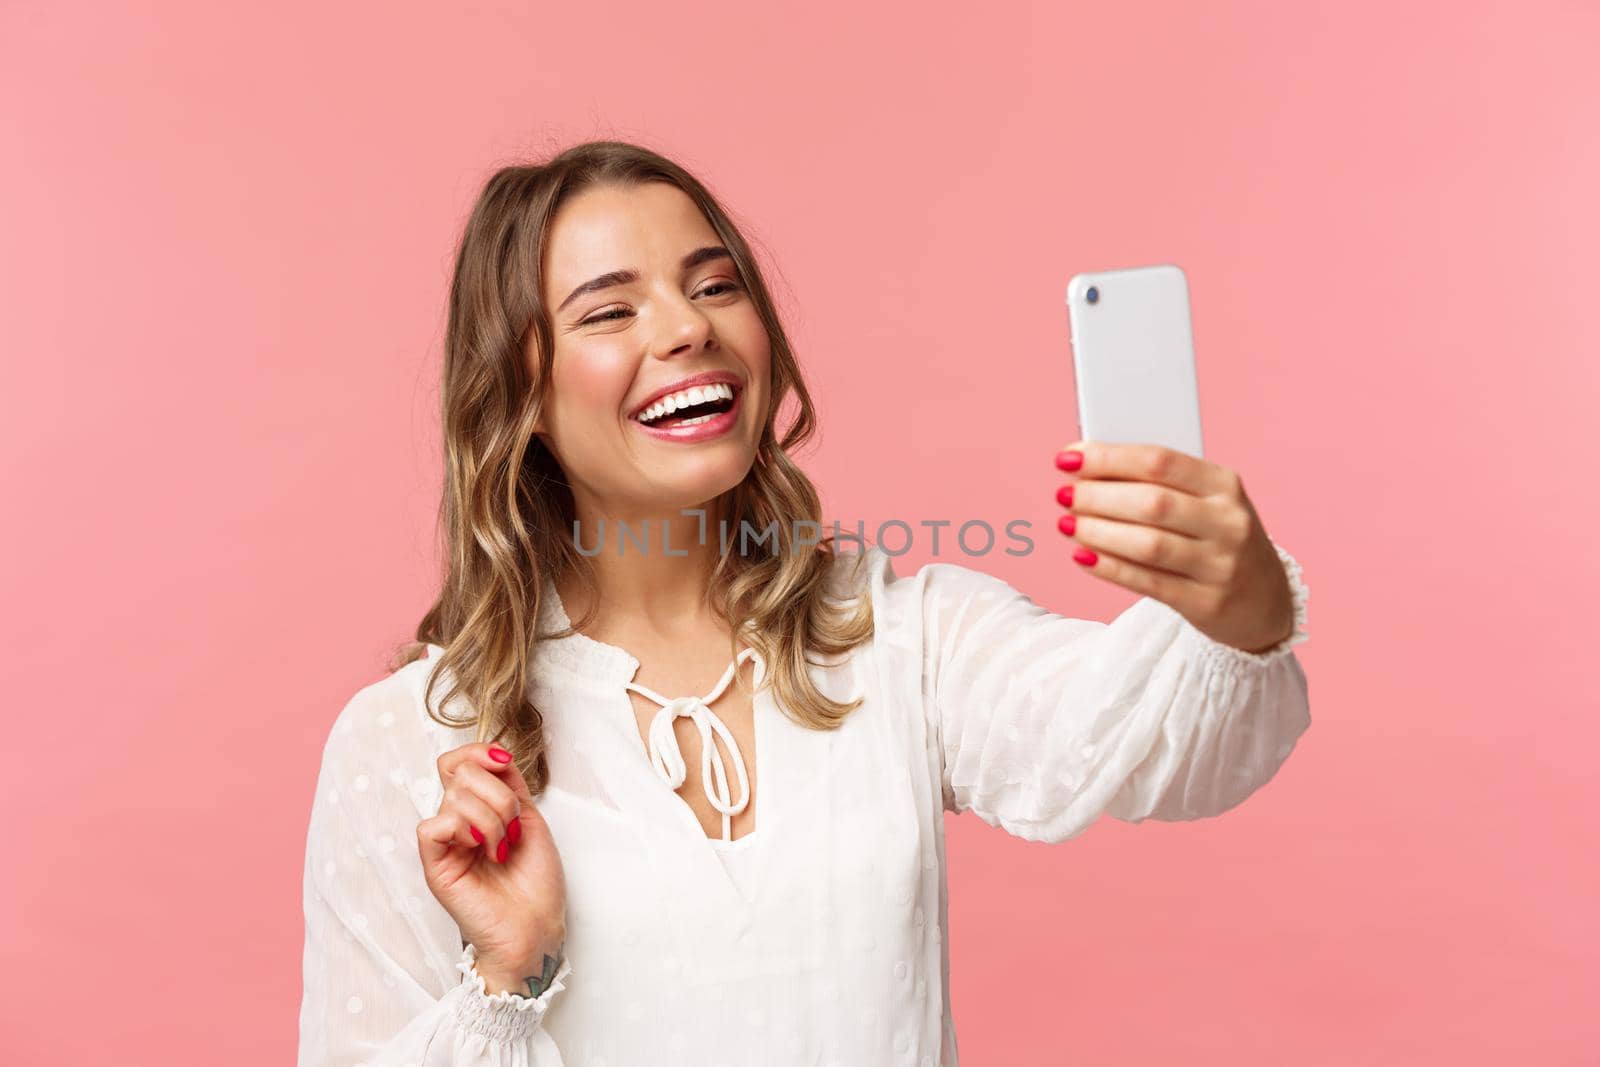 Close-up portrait of cheerful upbeat smiling blond girl, wearing white dress, laughing as record video, calling friend on mobile application, taking photo, selfie on smartphone, pink background.